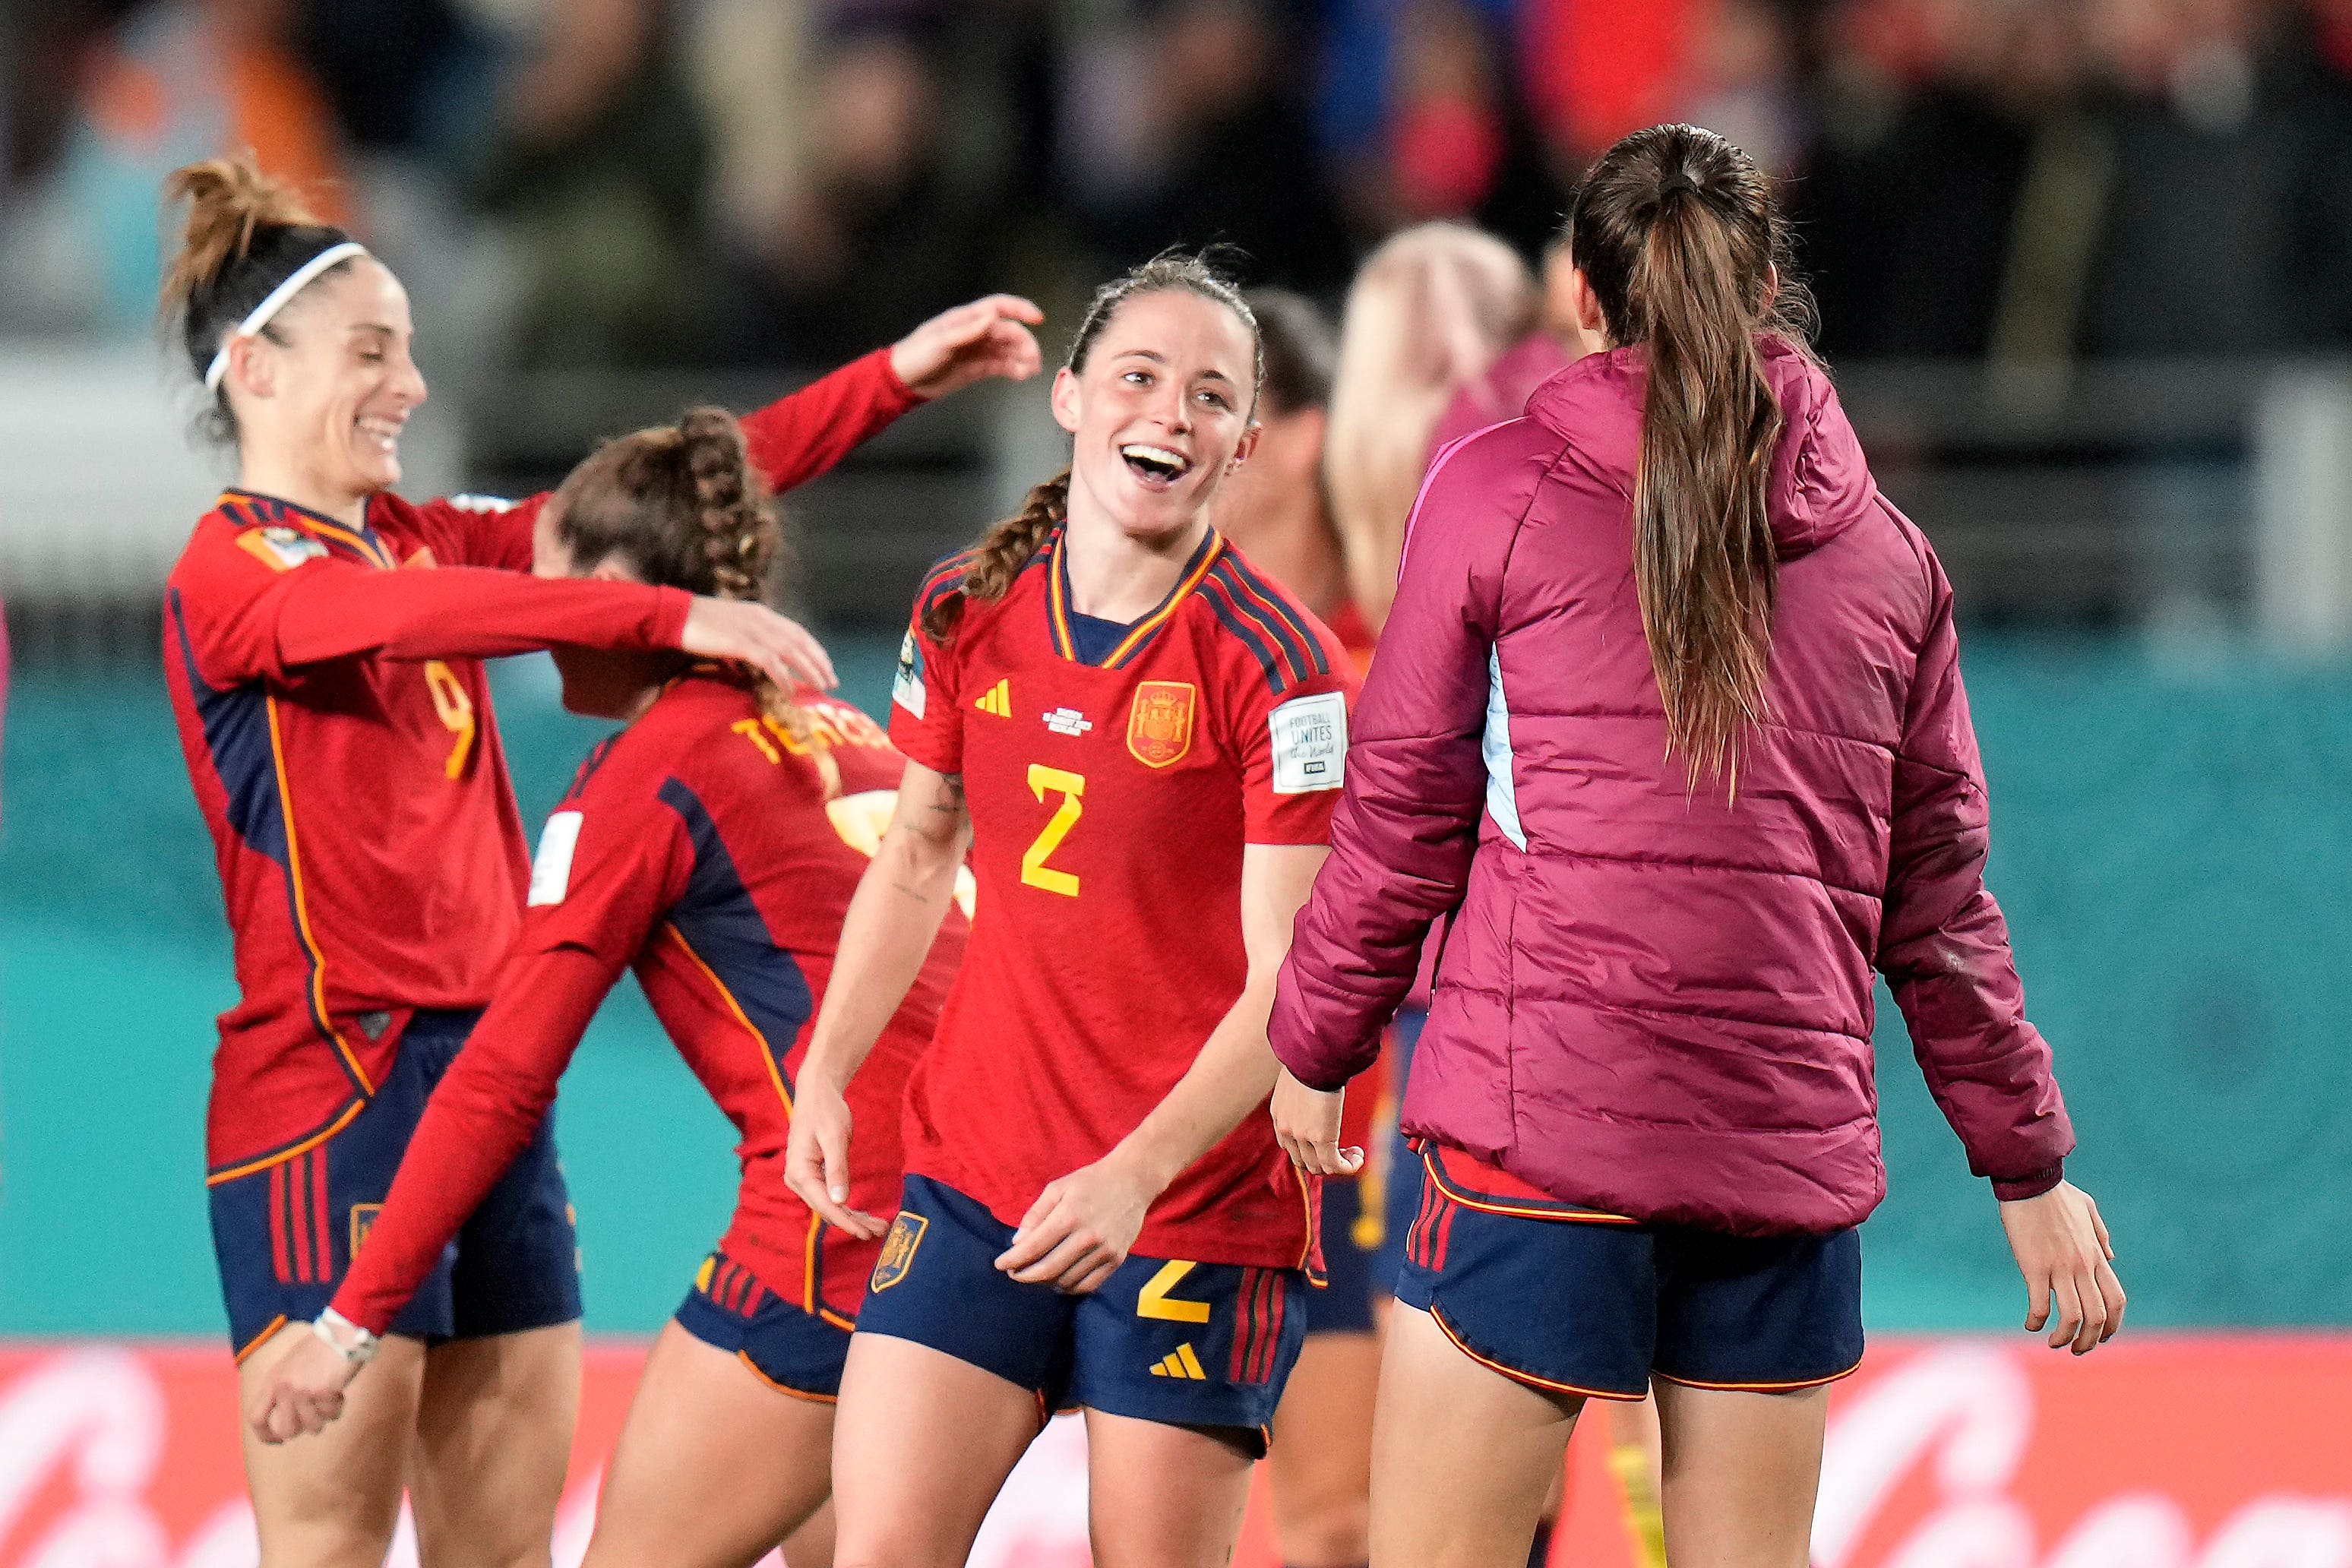  The image shows the Spanish women's national football team celebrating a victory.